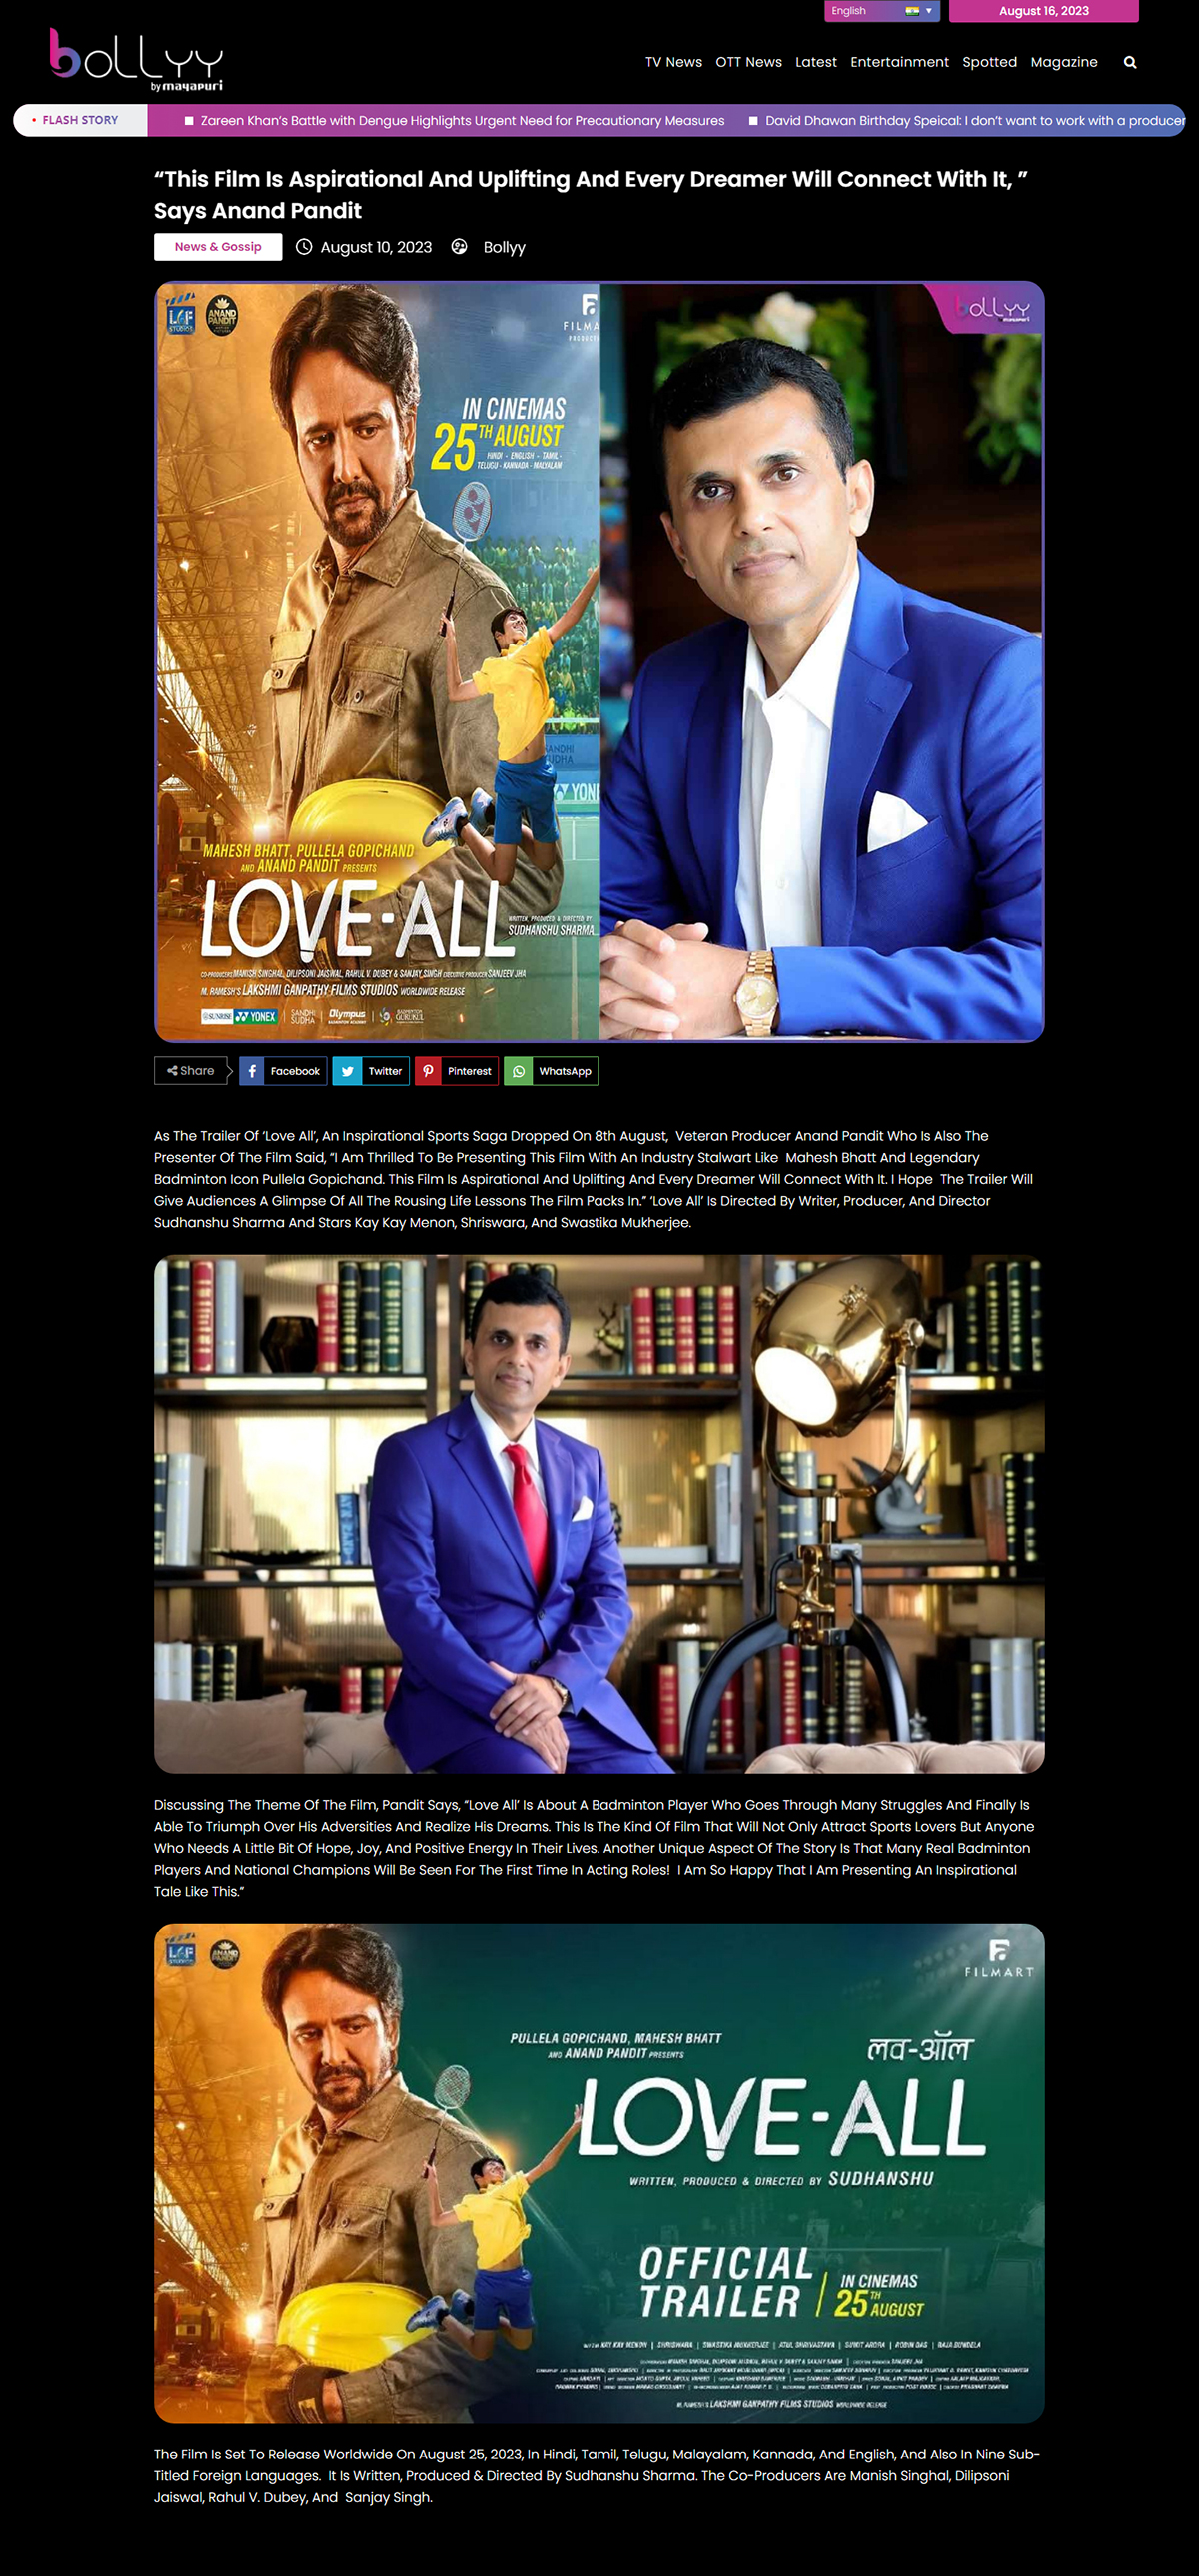 Anand Pandit Thought For Love all Movie